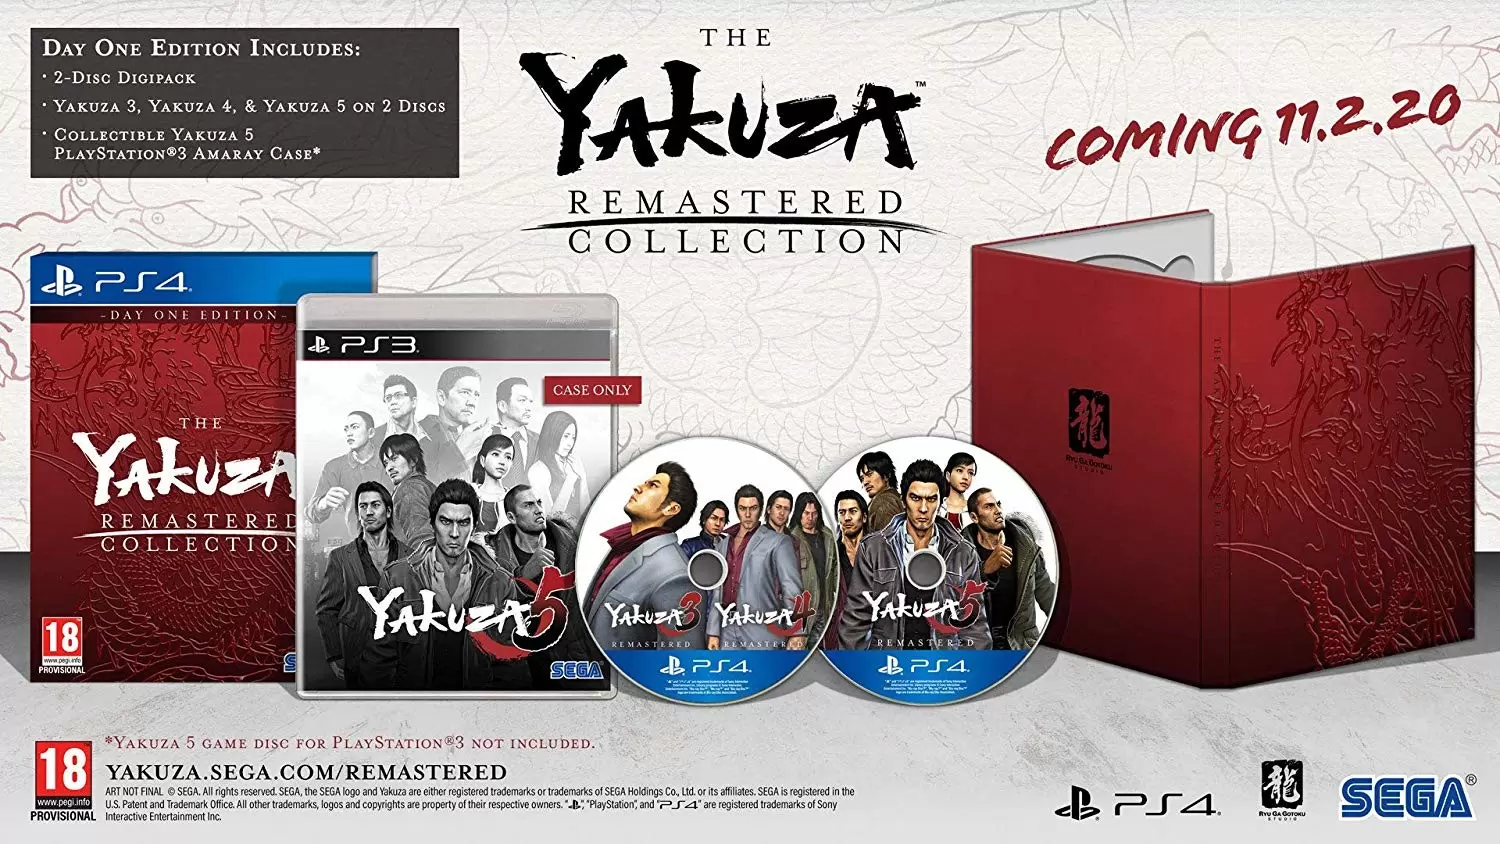 PS4 Games - The Yakuza Remastered Collection - Day One Edition